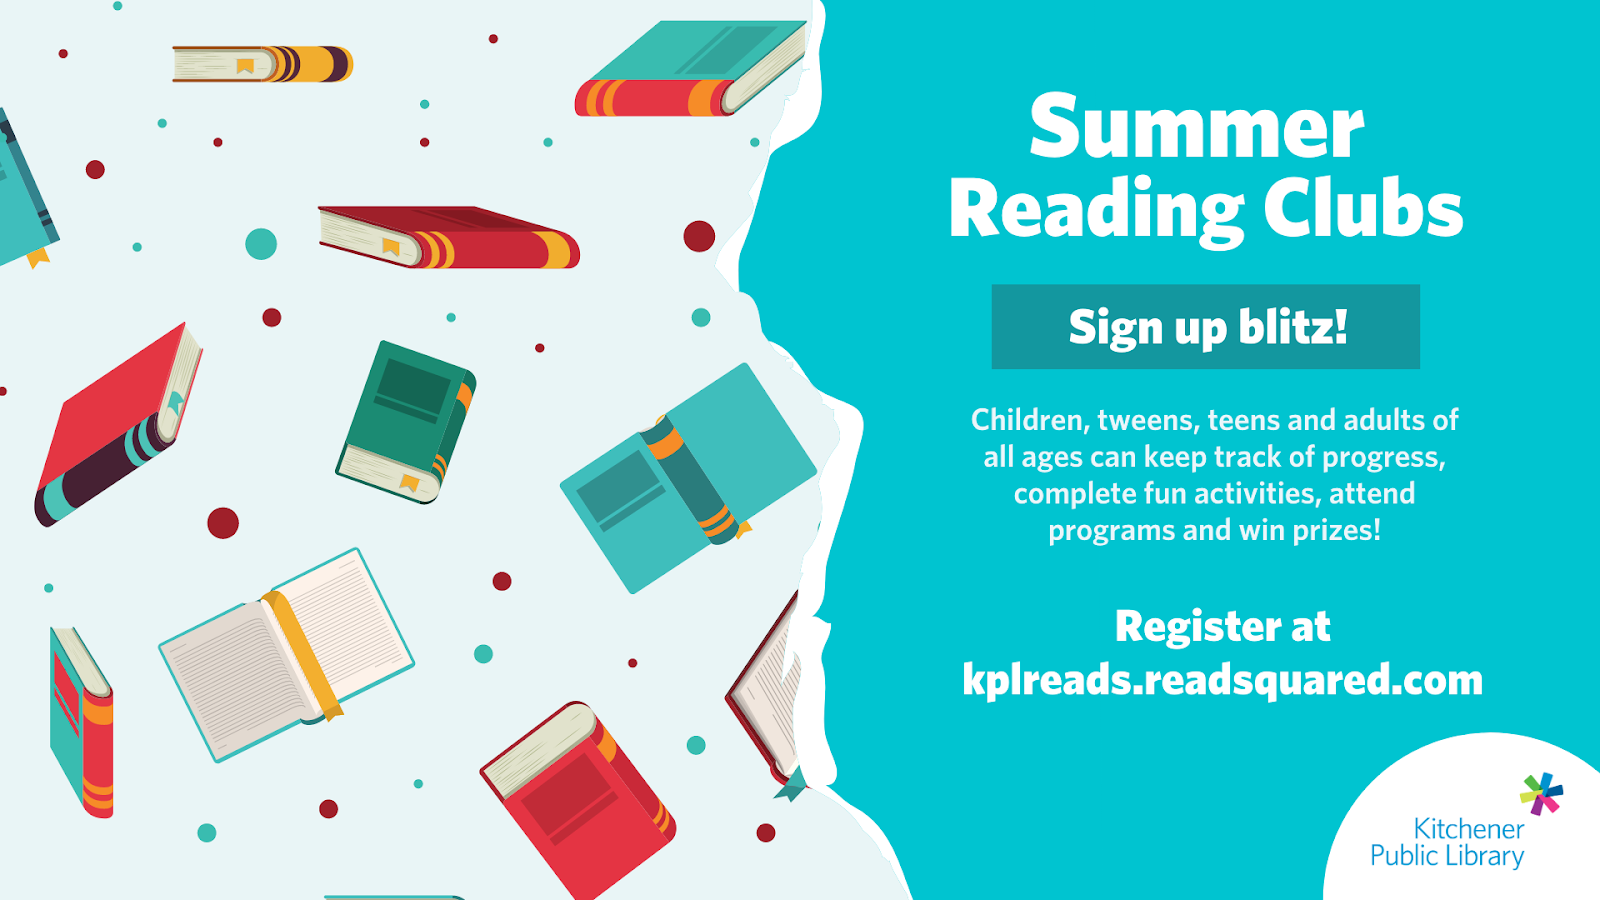 A poster for the Summer Reading Clubs sign up blitz. Children, tweens, teens, and adults of all ages can keep track of progress, complete fun activities, attend programs, and win prizes! Register at kplreads.readsquare.com